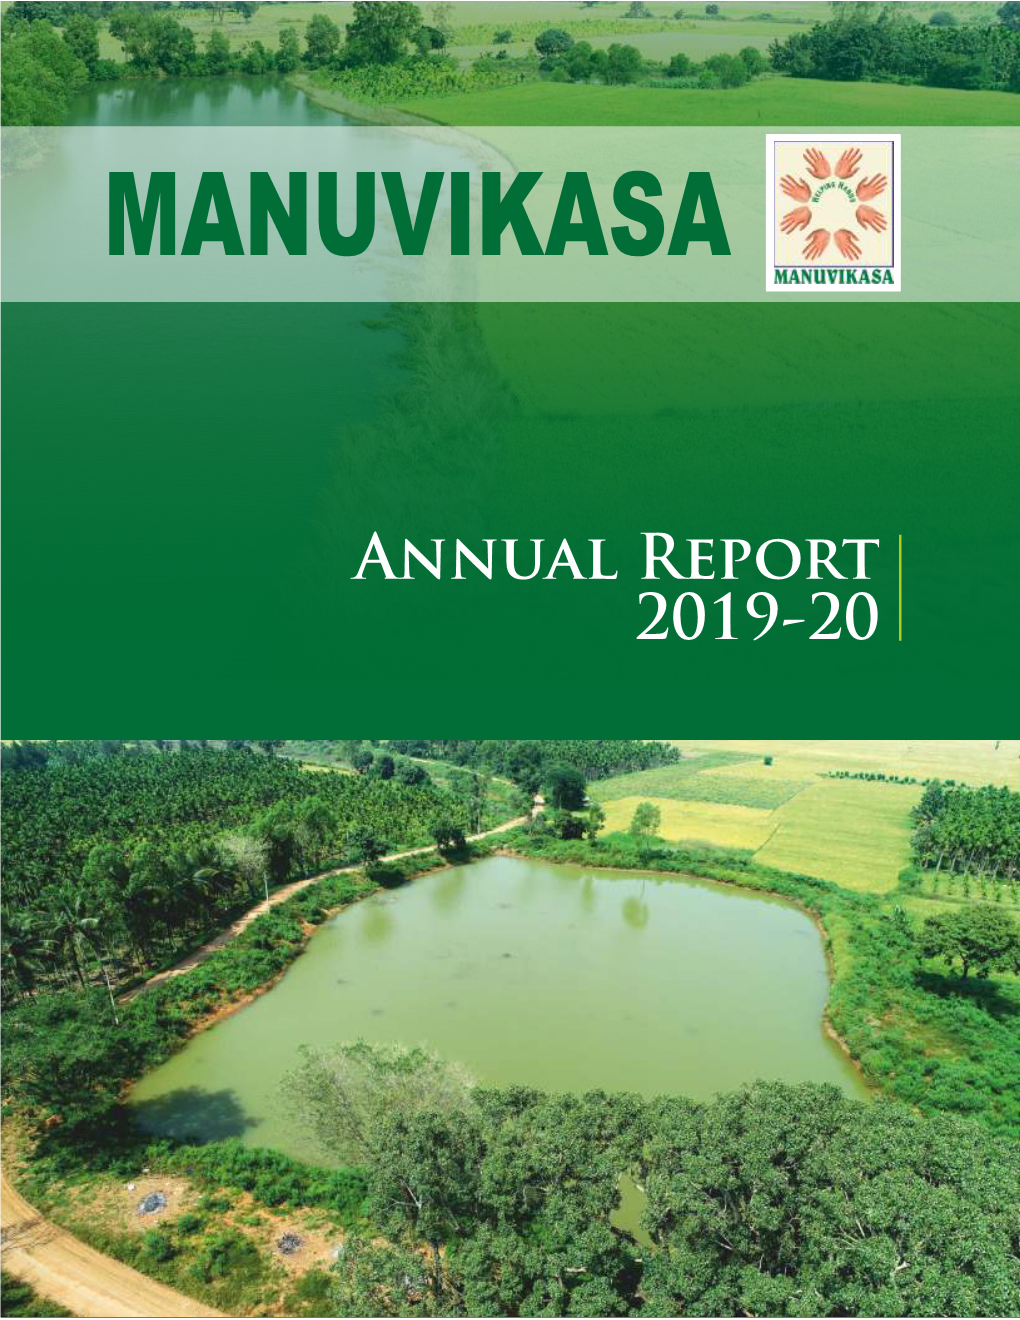 Annual Report 2019-20 Details of the Organization